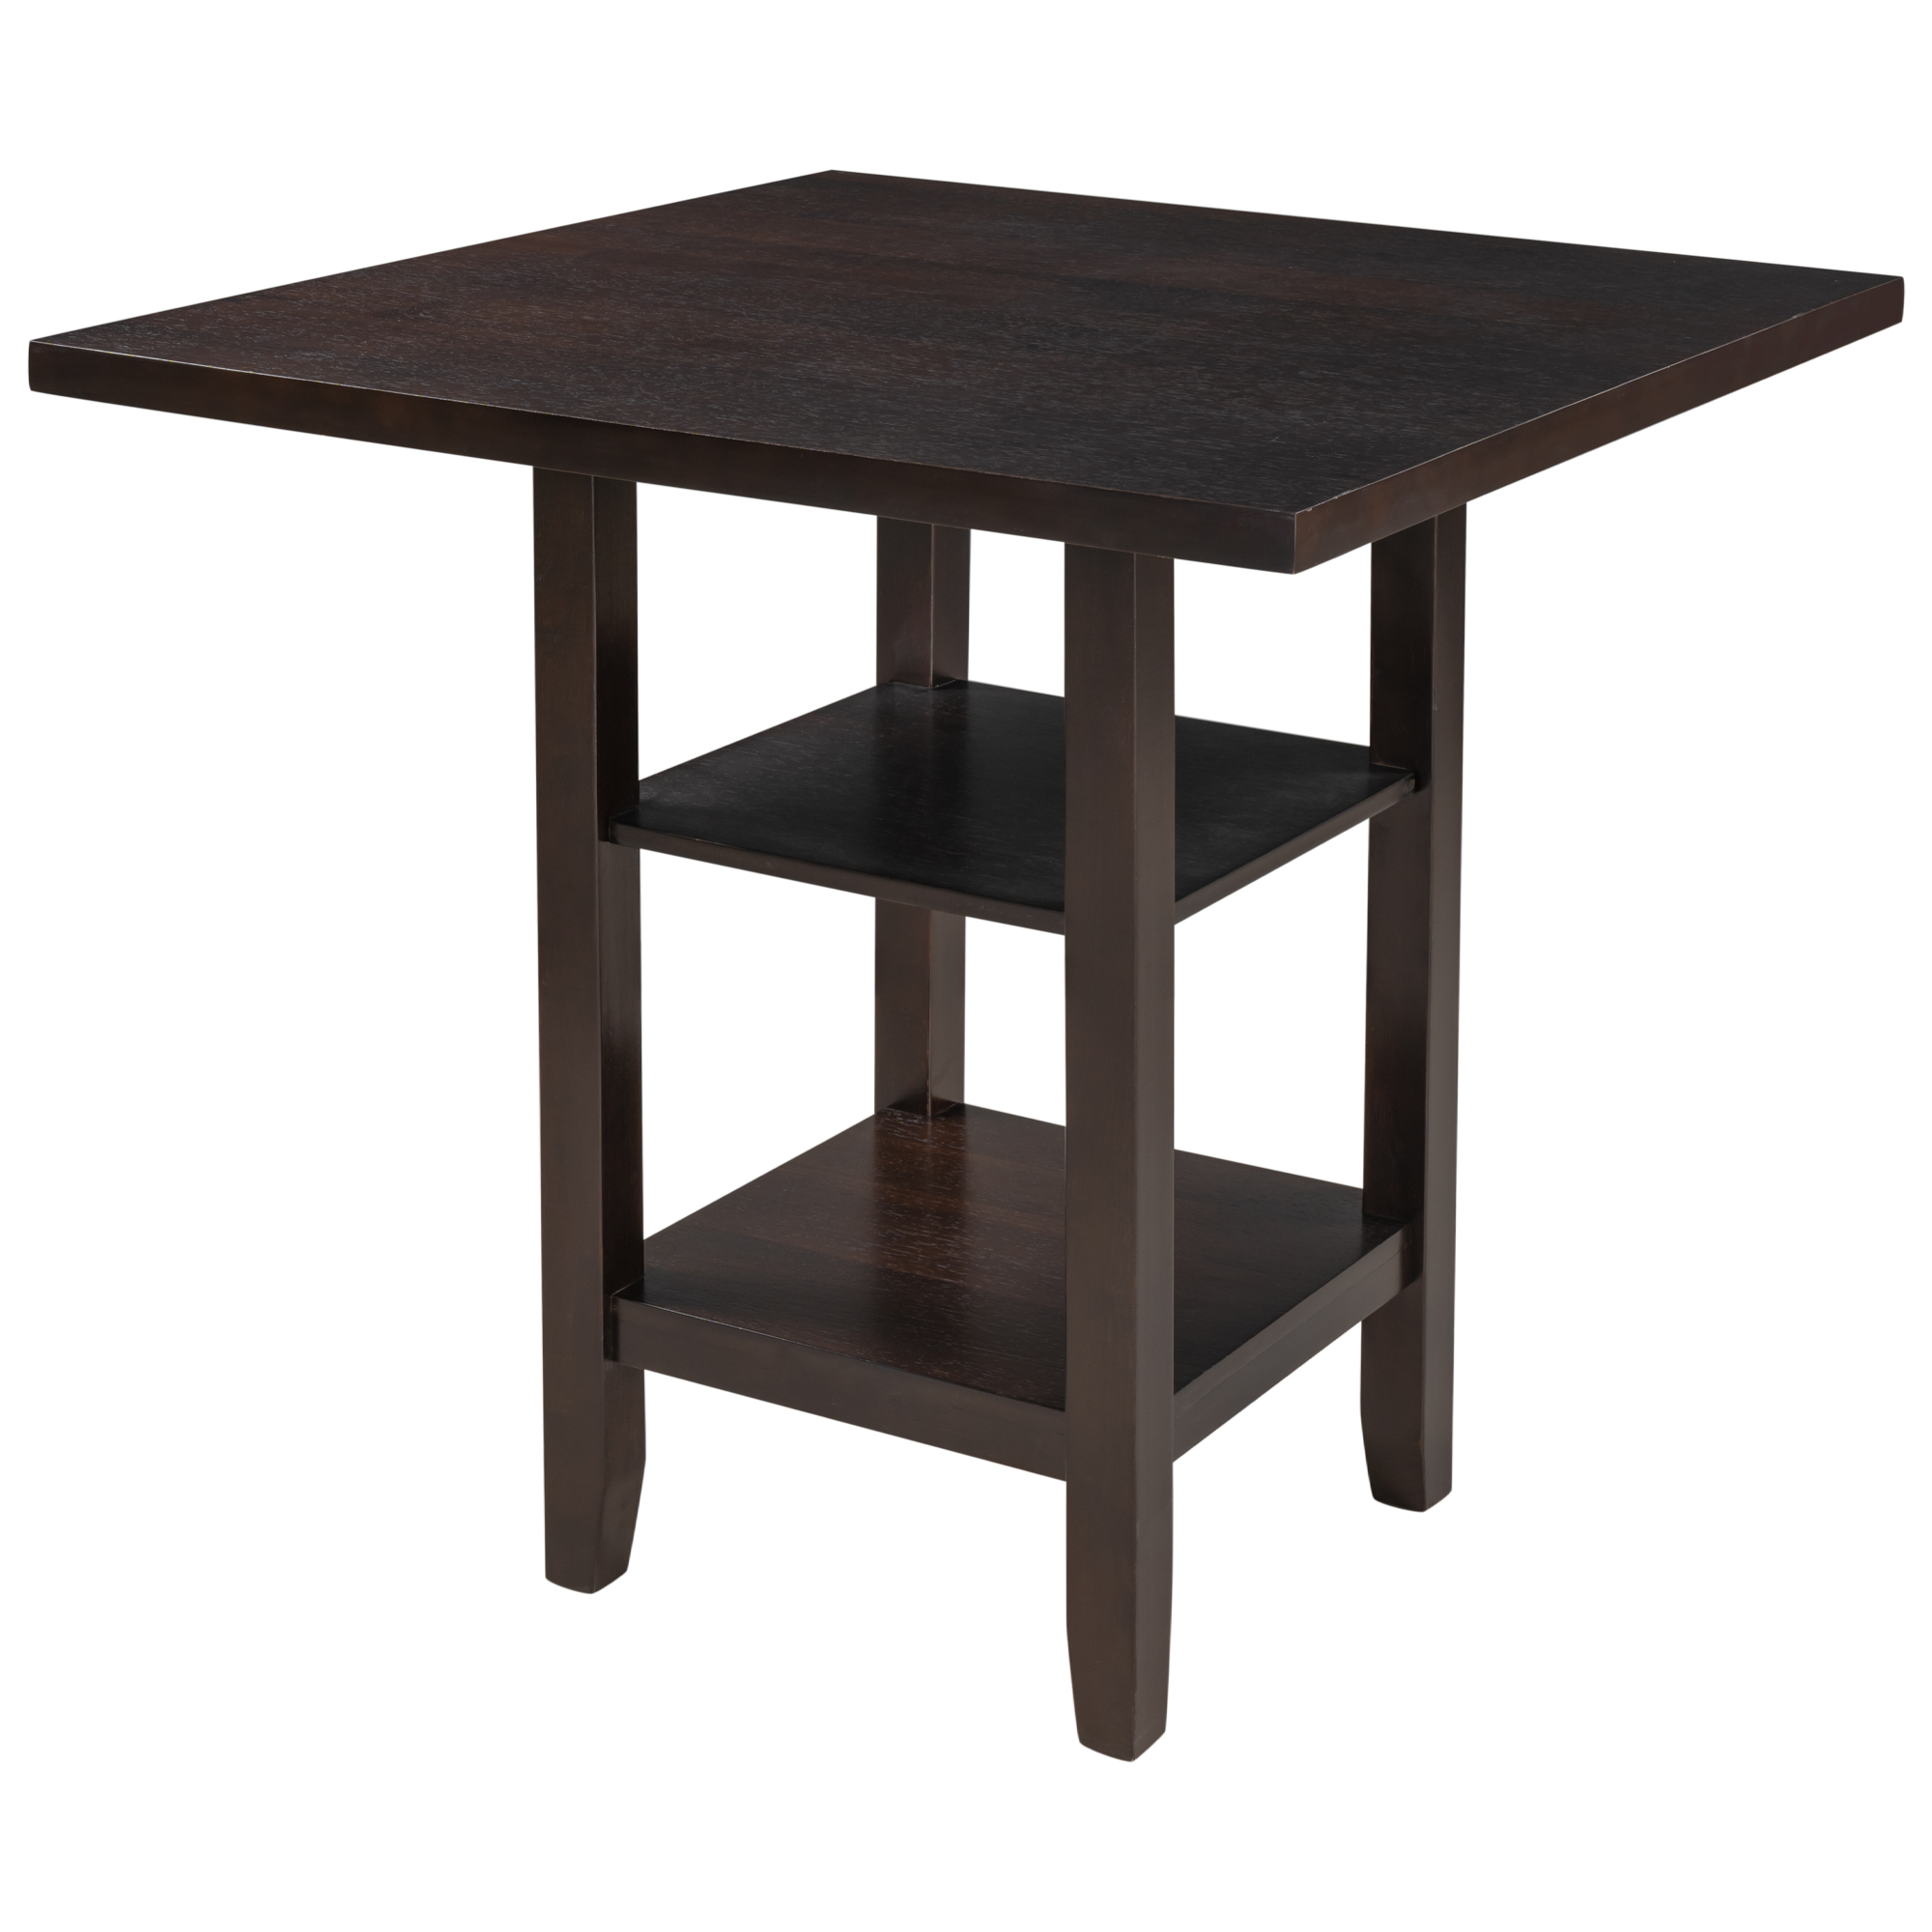 Square Wooden Counter Height Dining Table with 2-Tier Storage Shelving - WF212654AAP